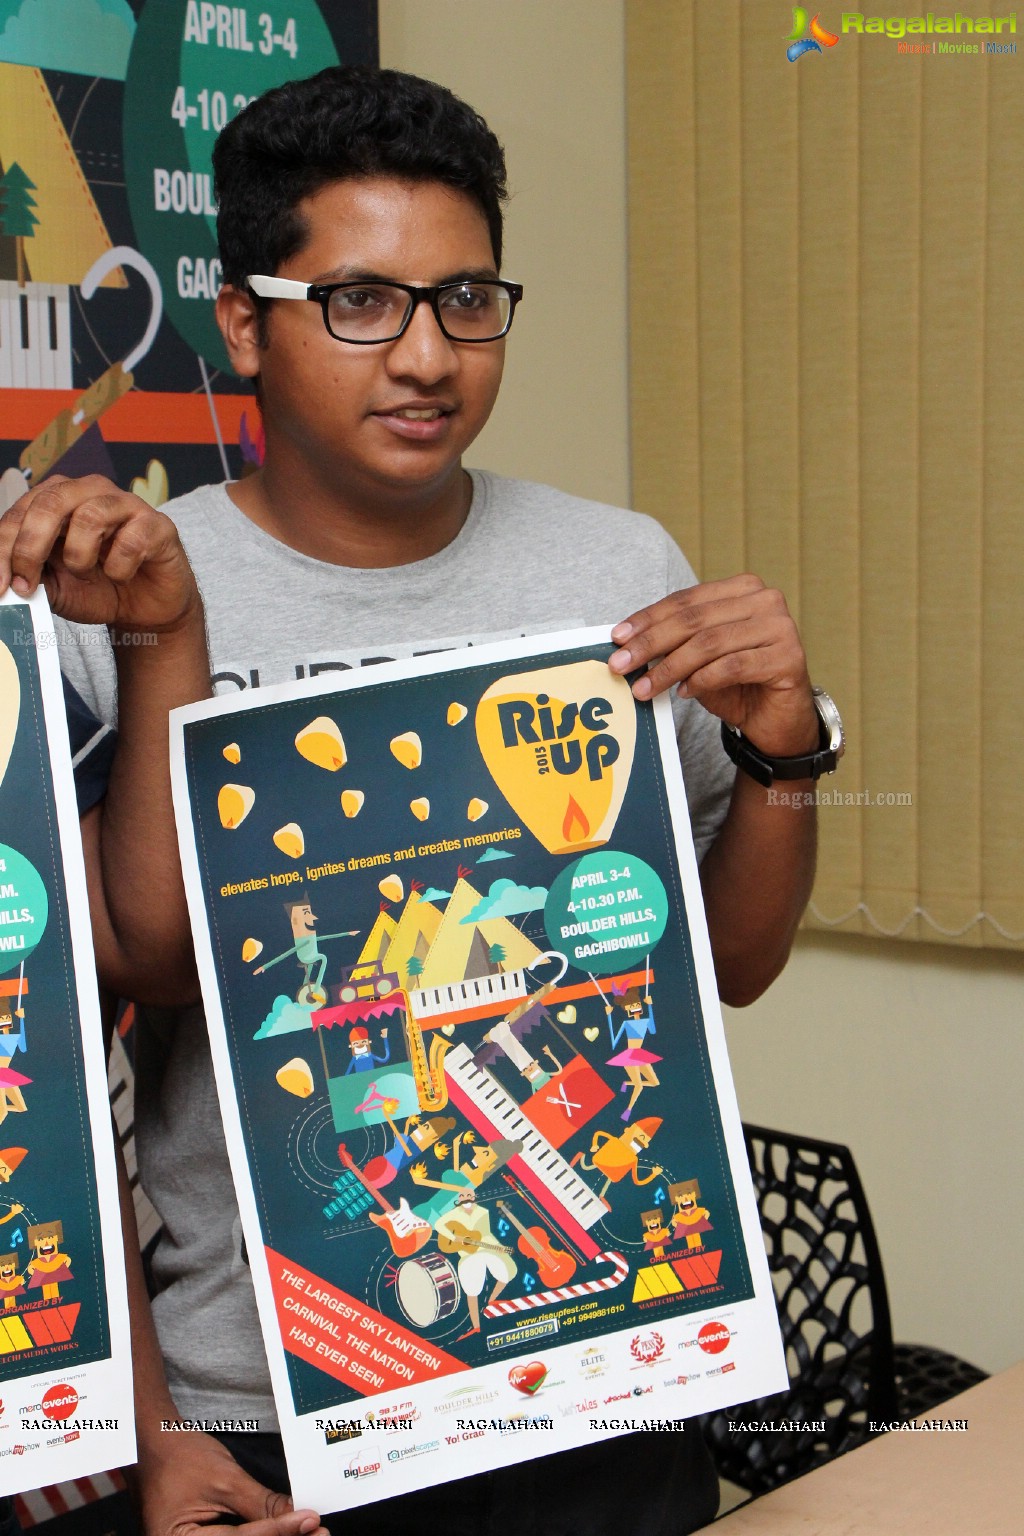 Rise Up 2015 - The Largest Sky Lantern Carnival Nation Poster Launch